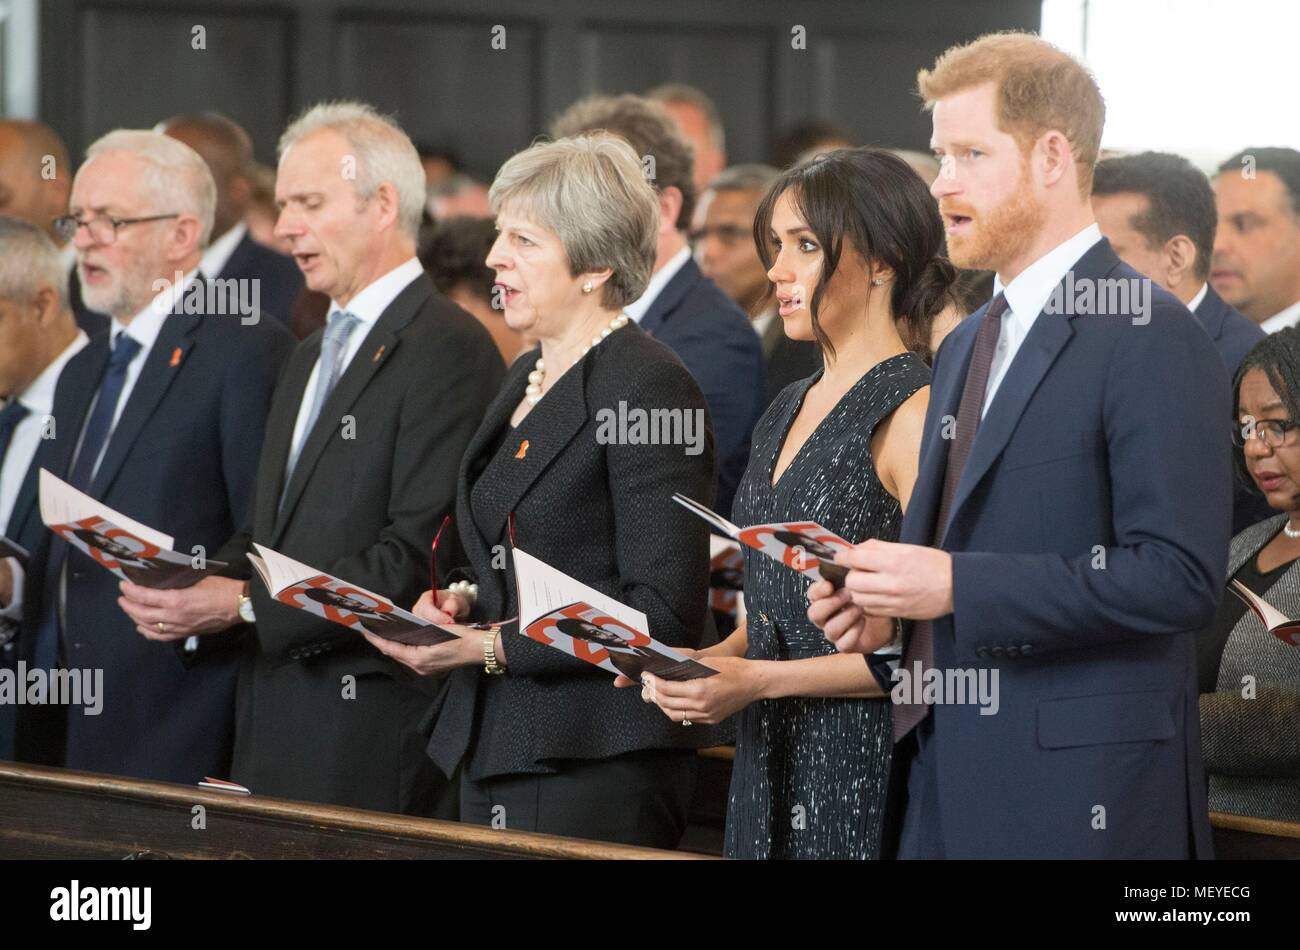 Labour leader Jeremy Corbyn, Cabinet Office minister David Lidington, Prime Minister Theresa May, Meghan Markle and Prince Harry attend a memorial service at St Martin-in-the-Fields in Trafalgar Square, London to commemorate the 25th anniversary of the murder of Stephen Lawrence. Stock Photo